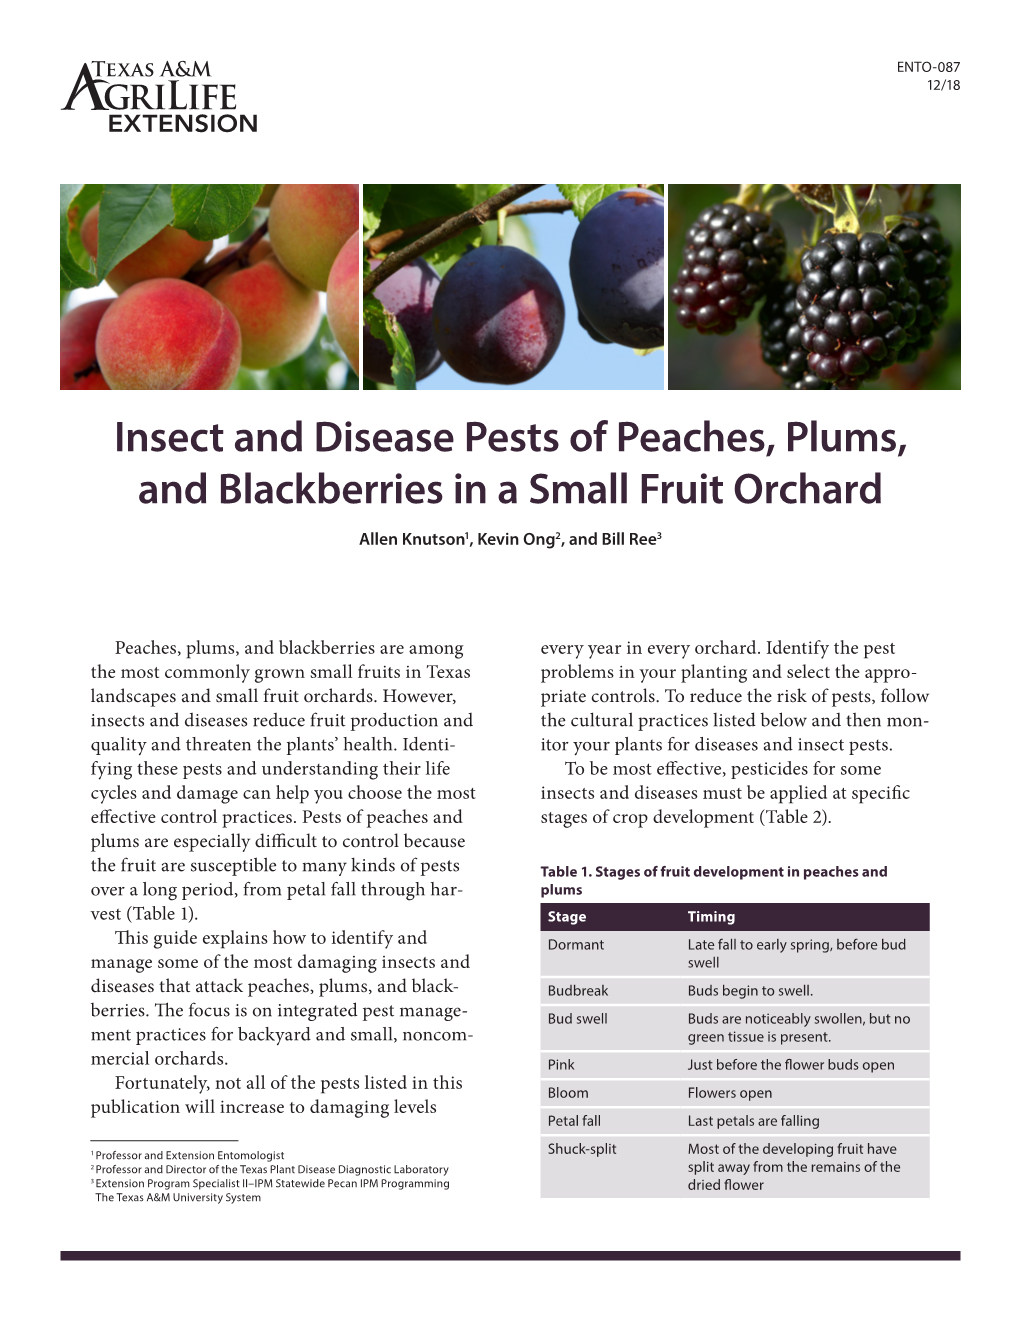 Insect and Disease Pests of Peaches, Plums, and Blackberries in a Small Fruit Orchard